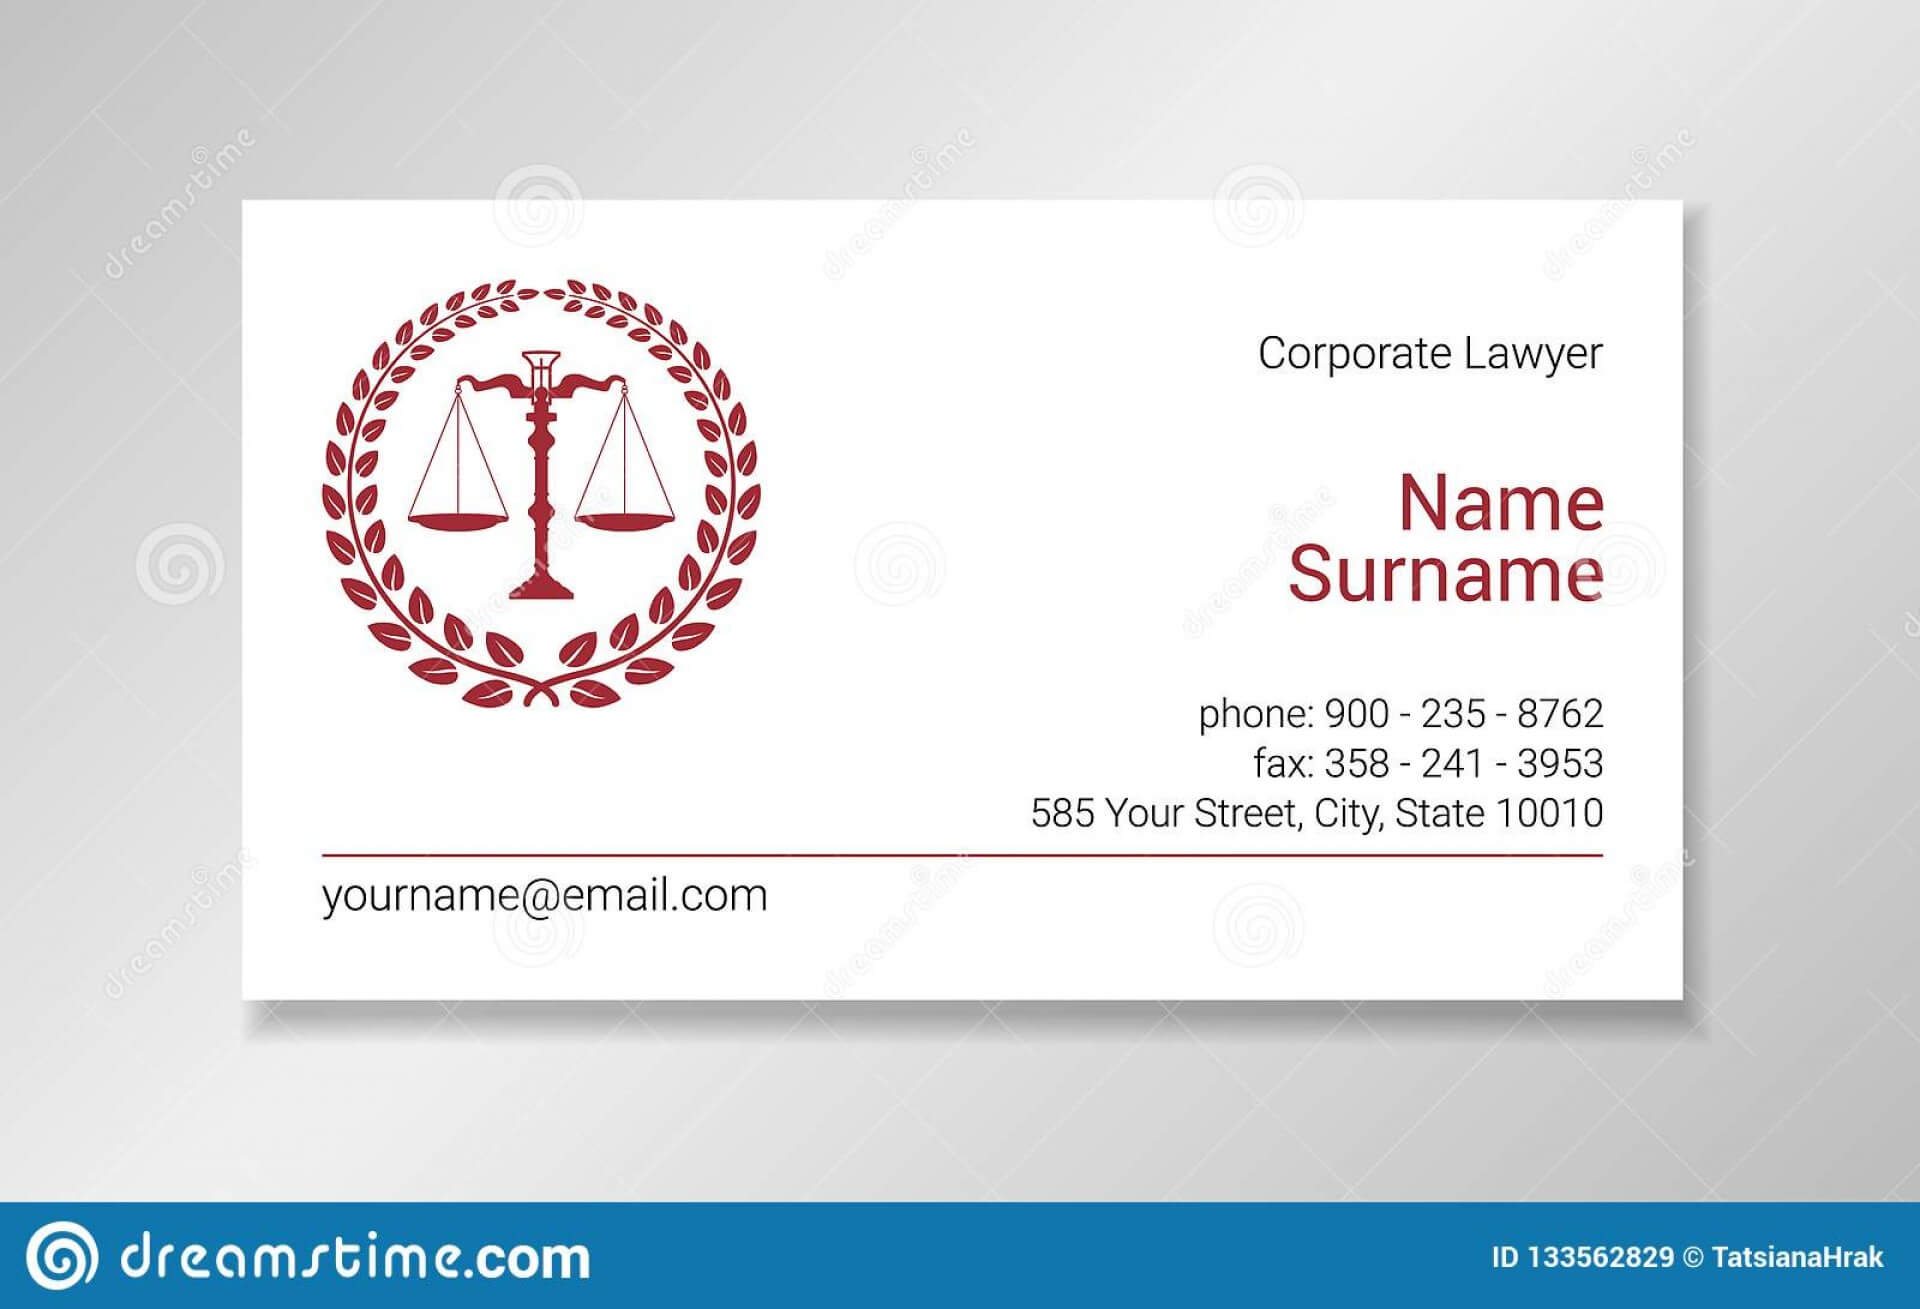 004 Lawyer Business Cards Templates Free Download Template Intended For Lawyer Business Cards Templates